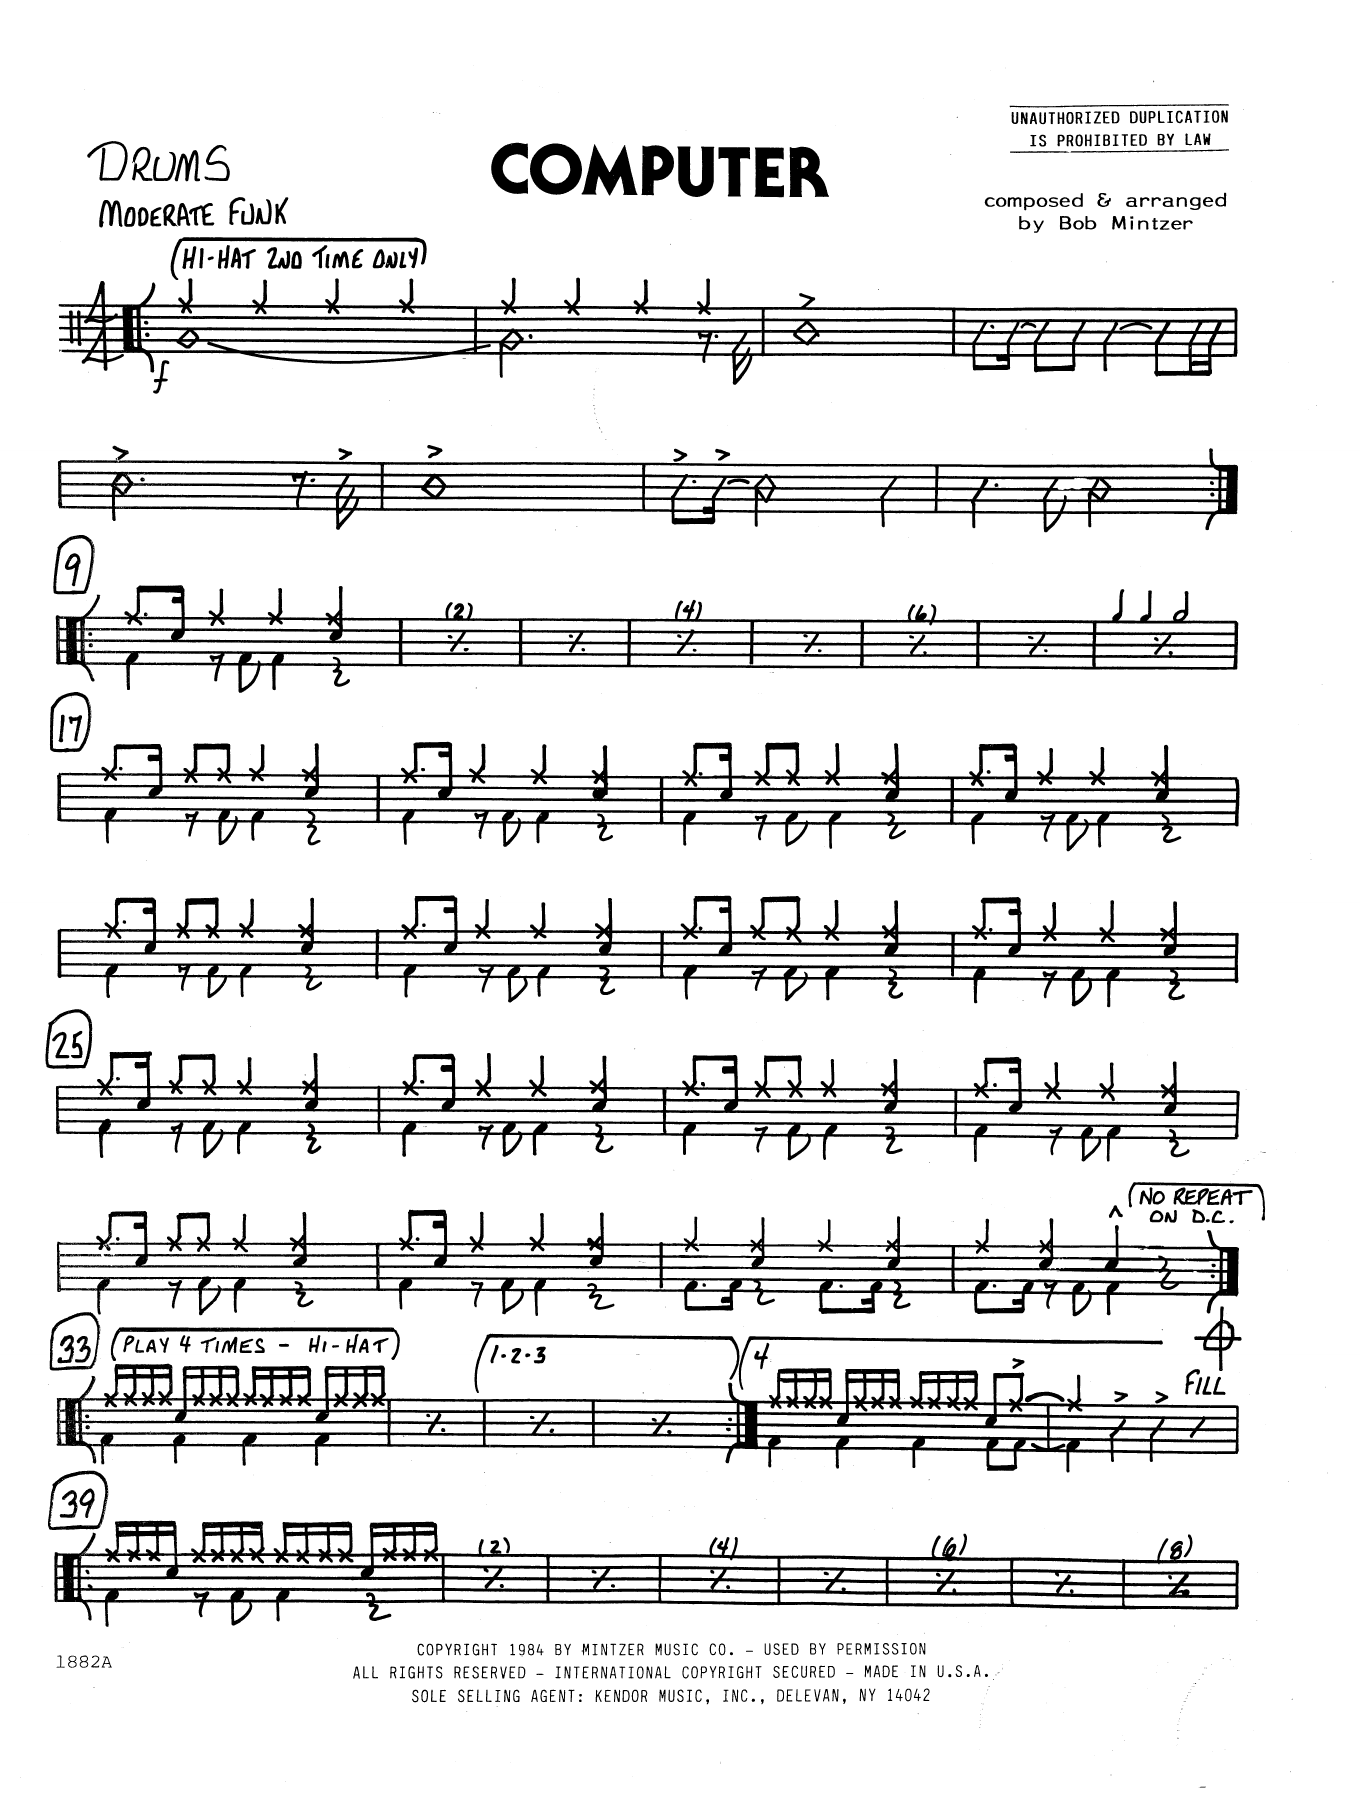 Bob Mintzer Computer - Drum Set sheet music preview music notes and score for Jazz Ensemble including 2 page(s)